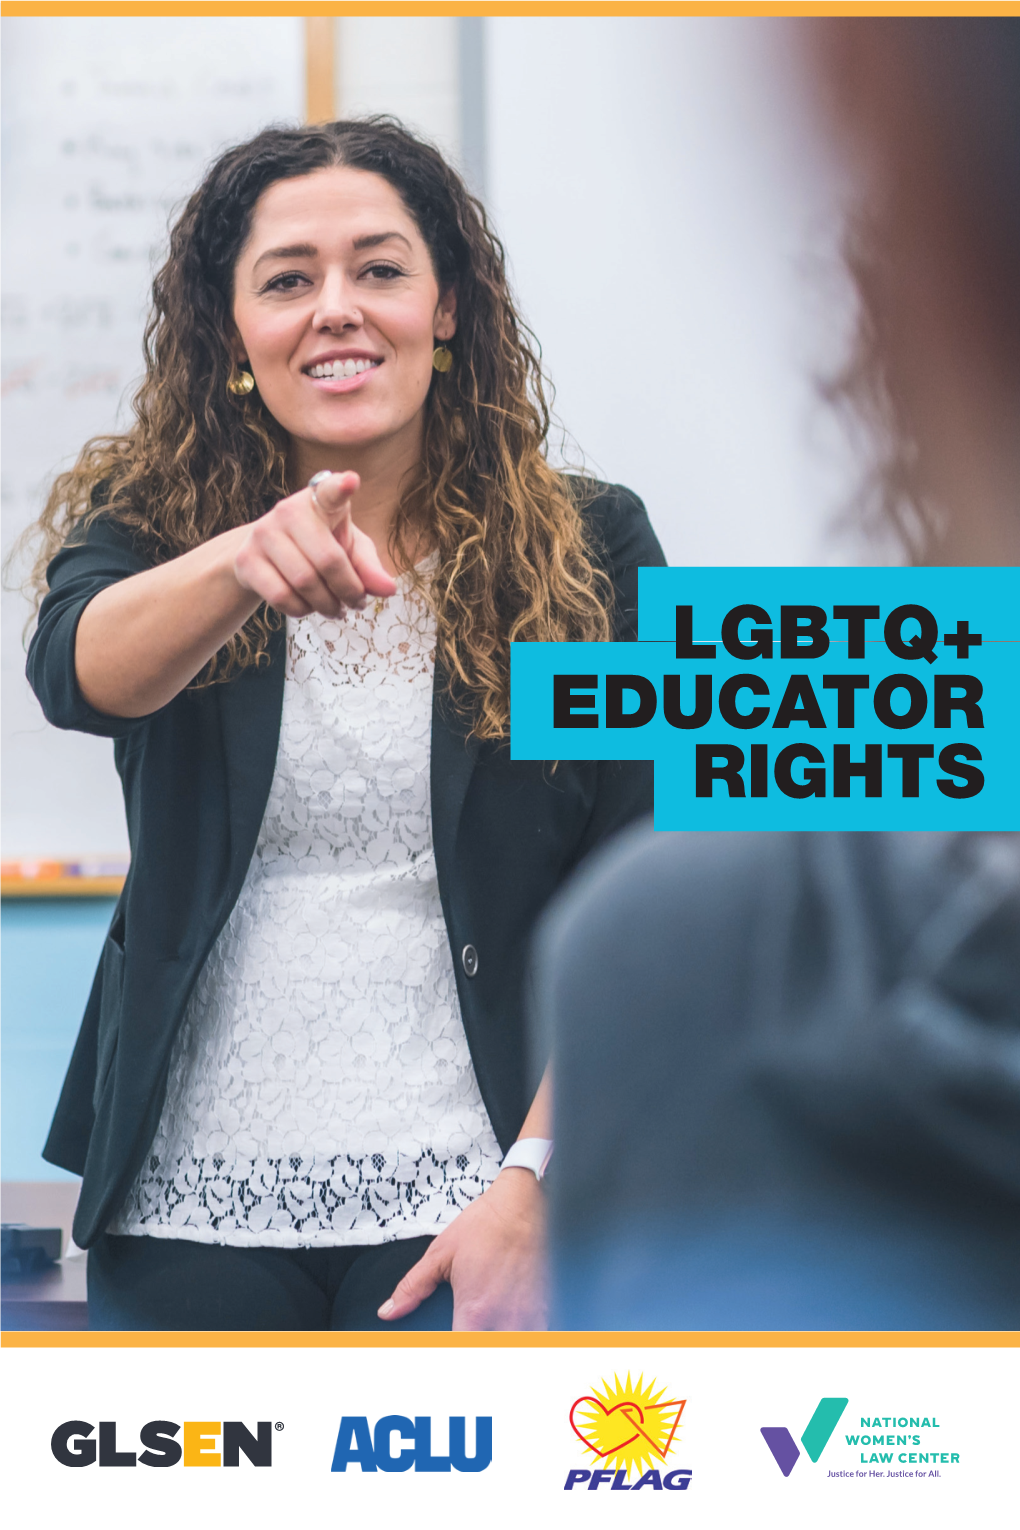 Lgbtq+ Educator Rights It’S Official: the Us Supreme Court Says Anti-Lgbtq+ Discrimination Is Illegal